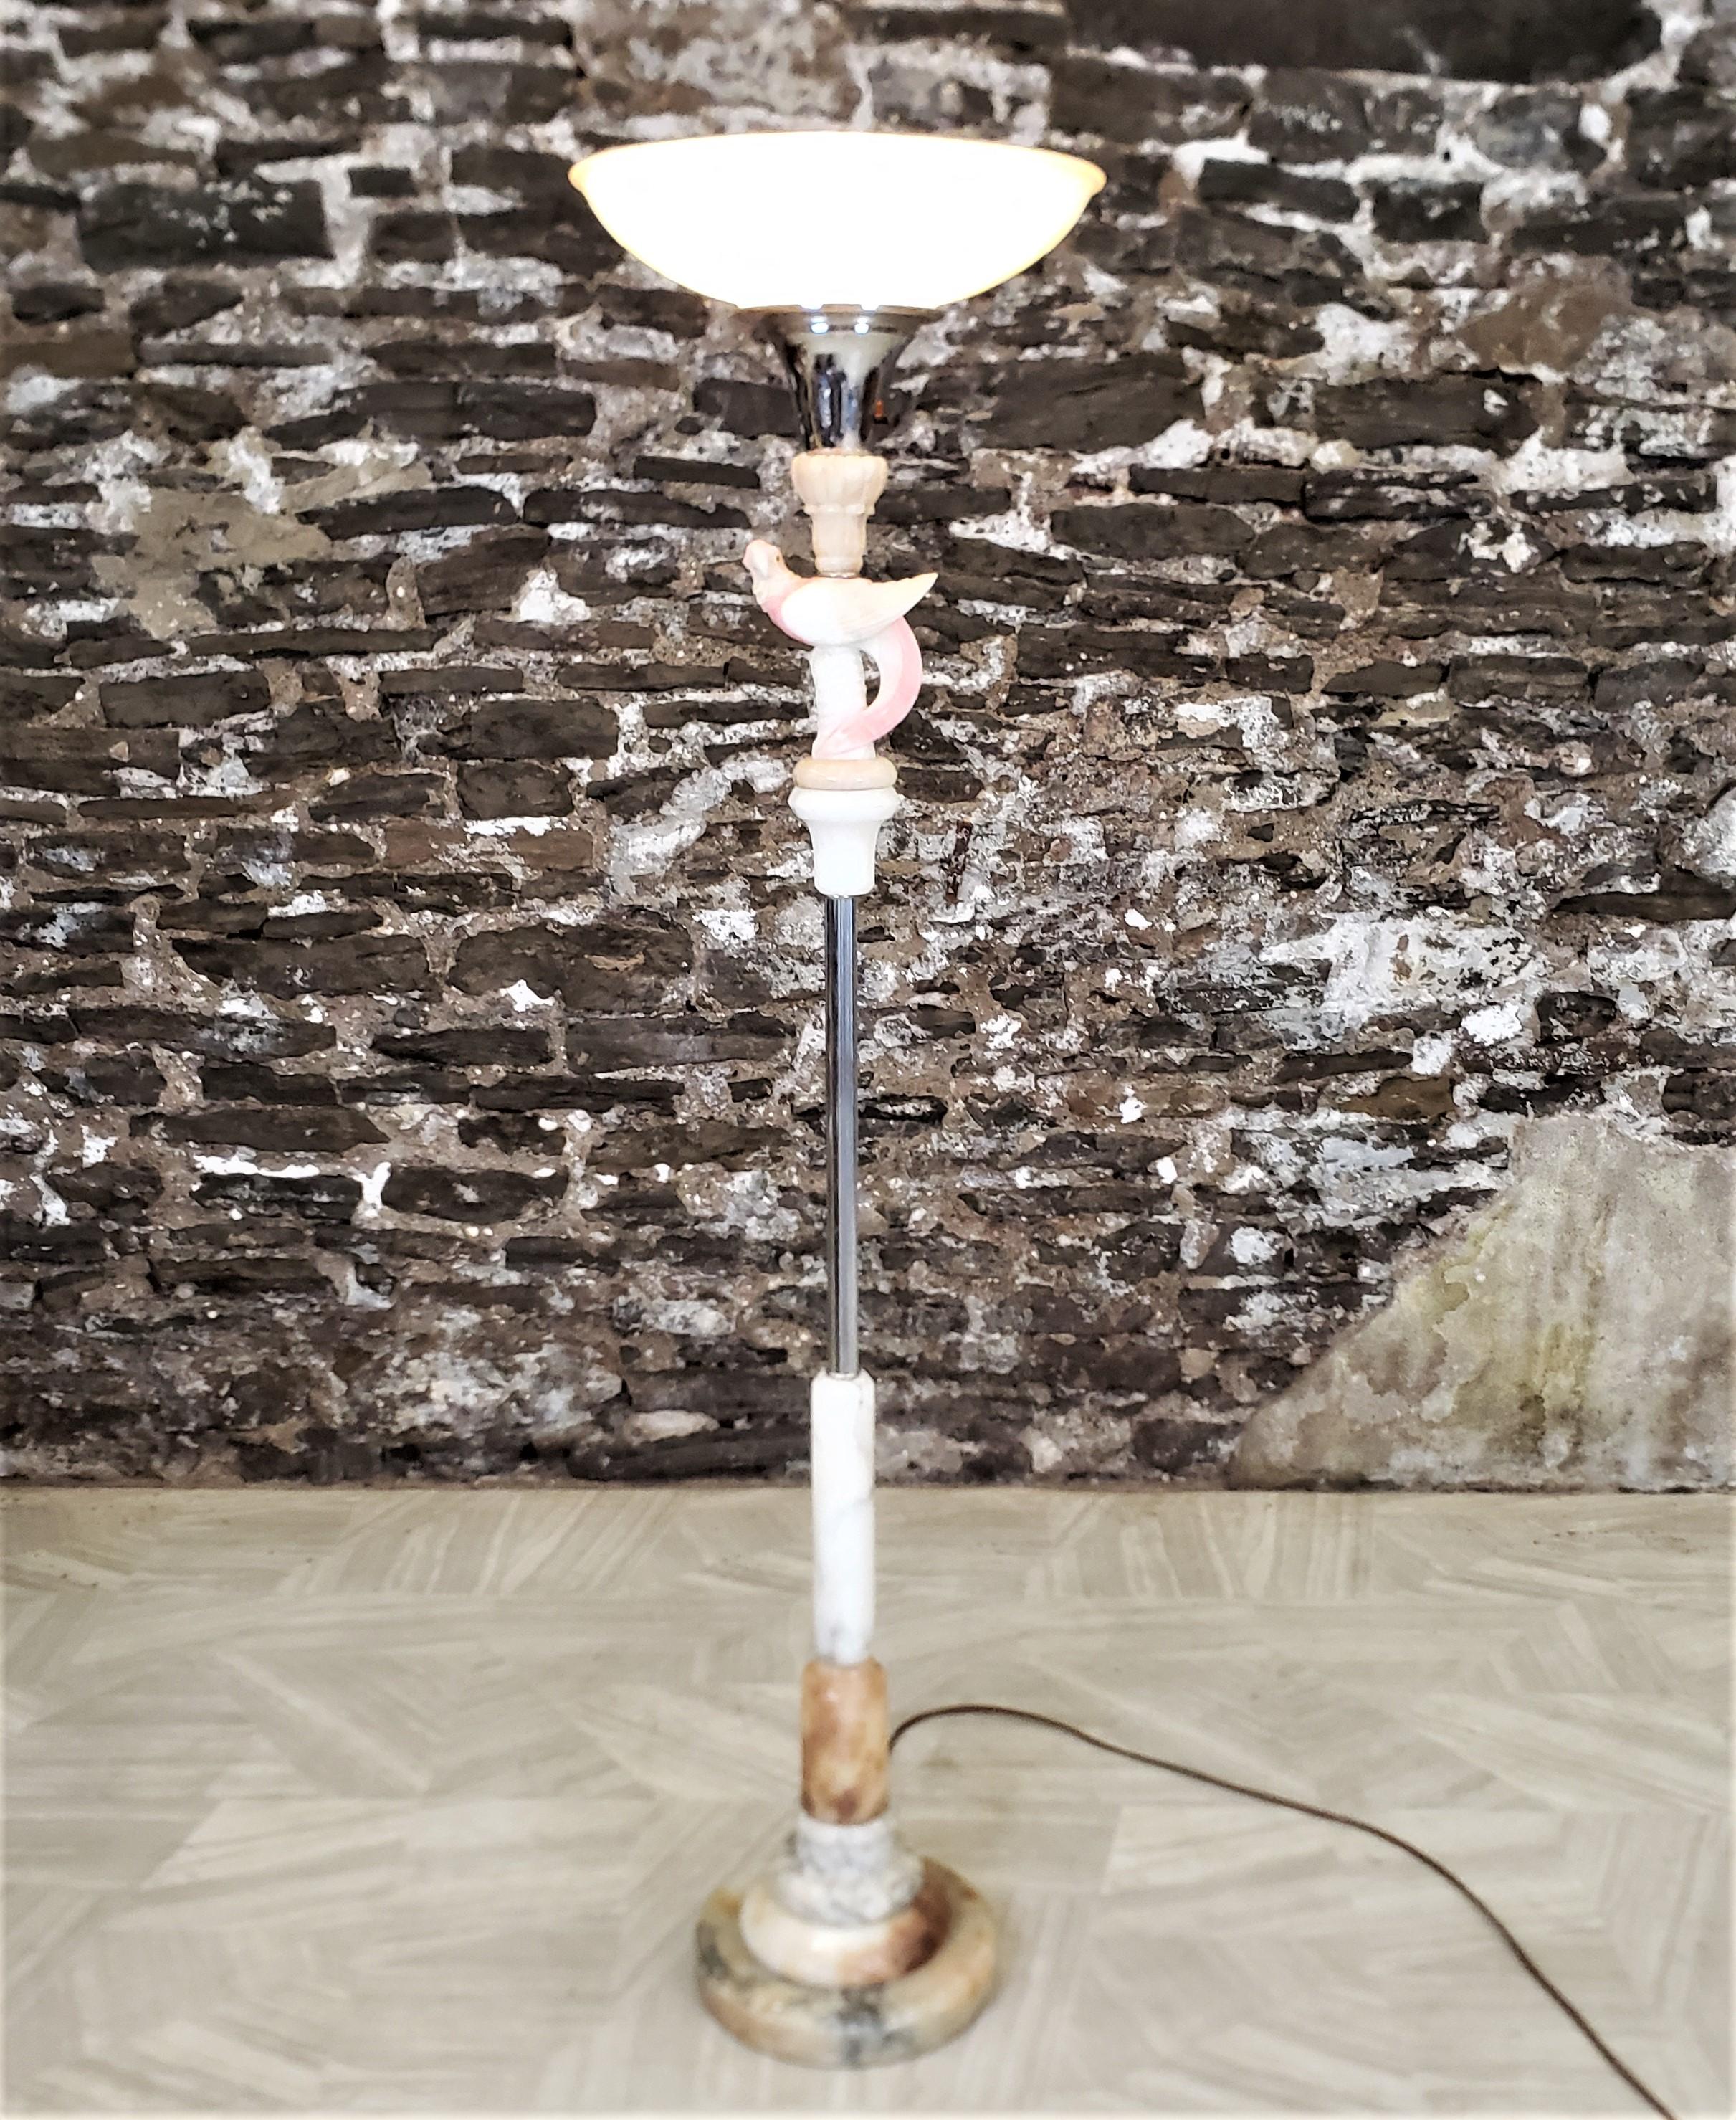 This antique torchiere floor lamp is unsigned, but presumed to have originated from the United States and date to approximately 1920 and done in the period Art Deco style. The lamp is composed of a chrome shaft with a hand-carved and painted parrot